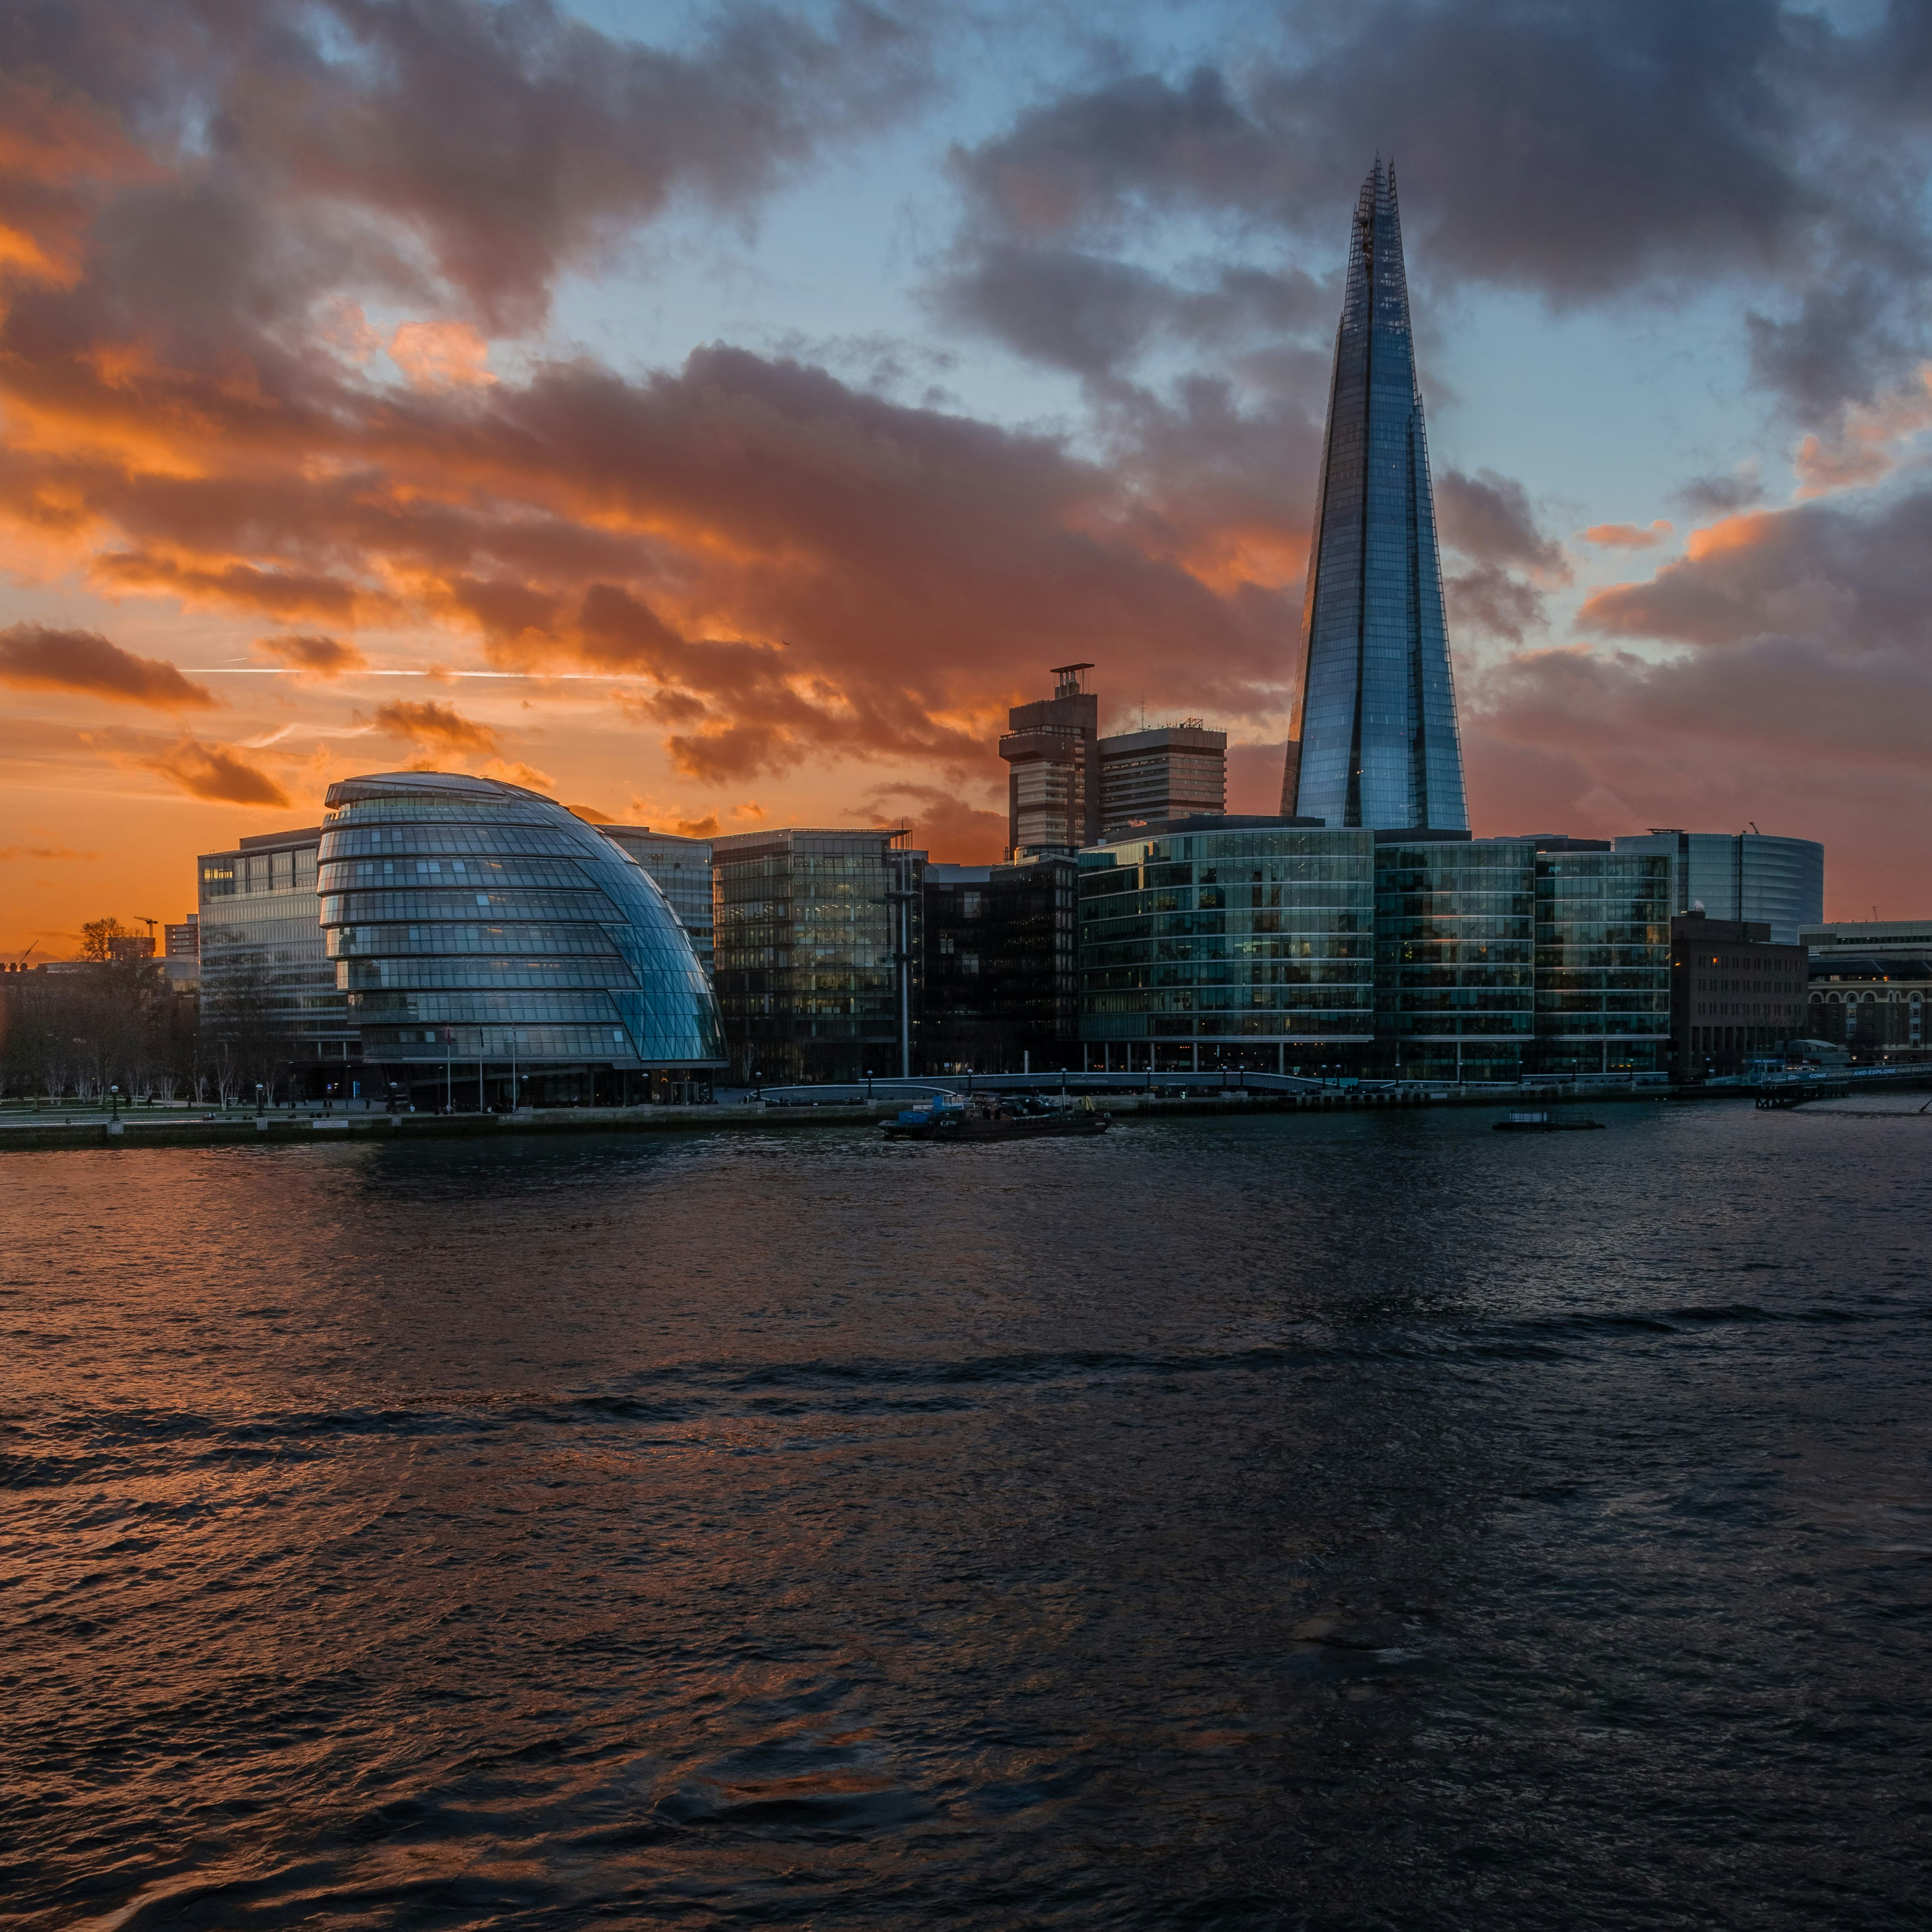 I went on a walk with my wife to explore the “lesser known” south bank of the Thames, east of Tower Bridge on a very cold and windy but beautiful evening. This is the view we were greeted with when walking back. Makes you want to visit London eh?